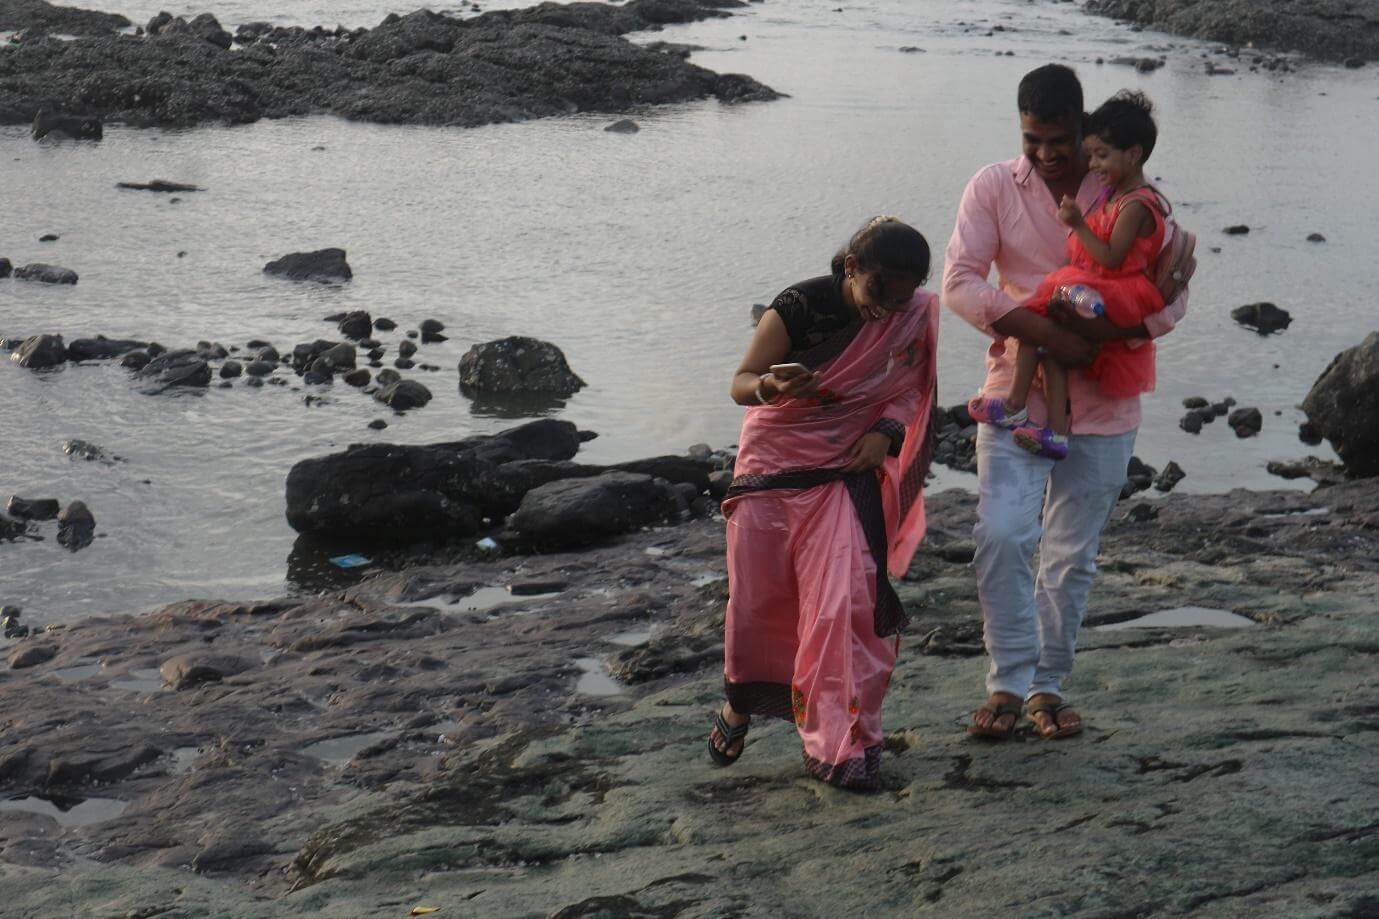 A family of three, a man, woman, and child, walk back to promenade, laughing. All three are wearing shades of pink.